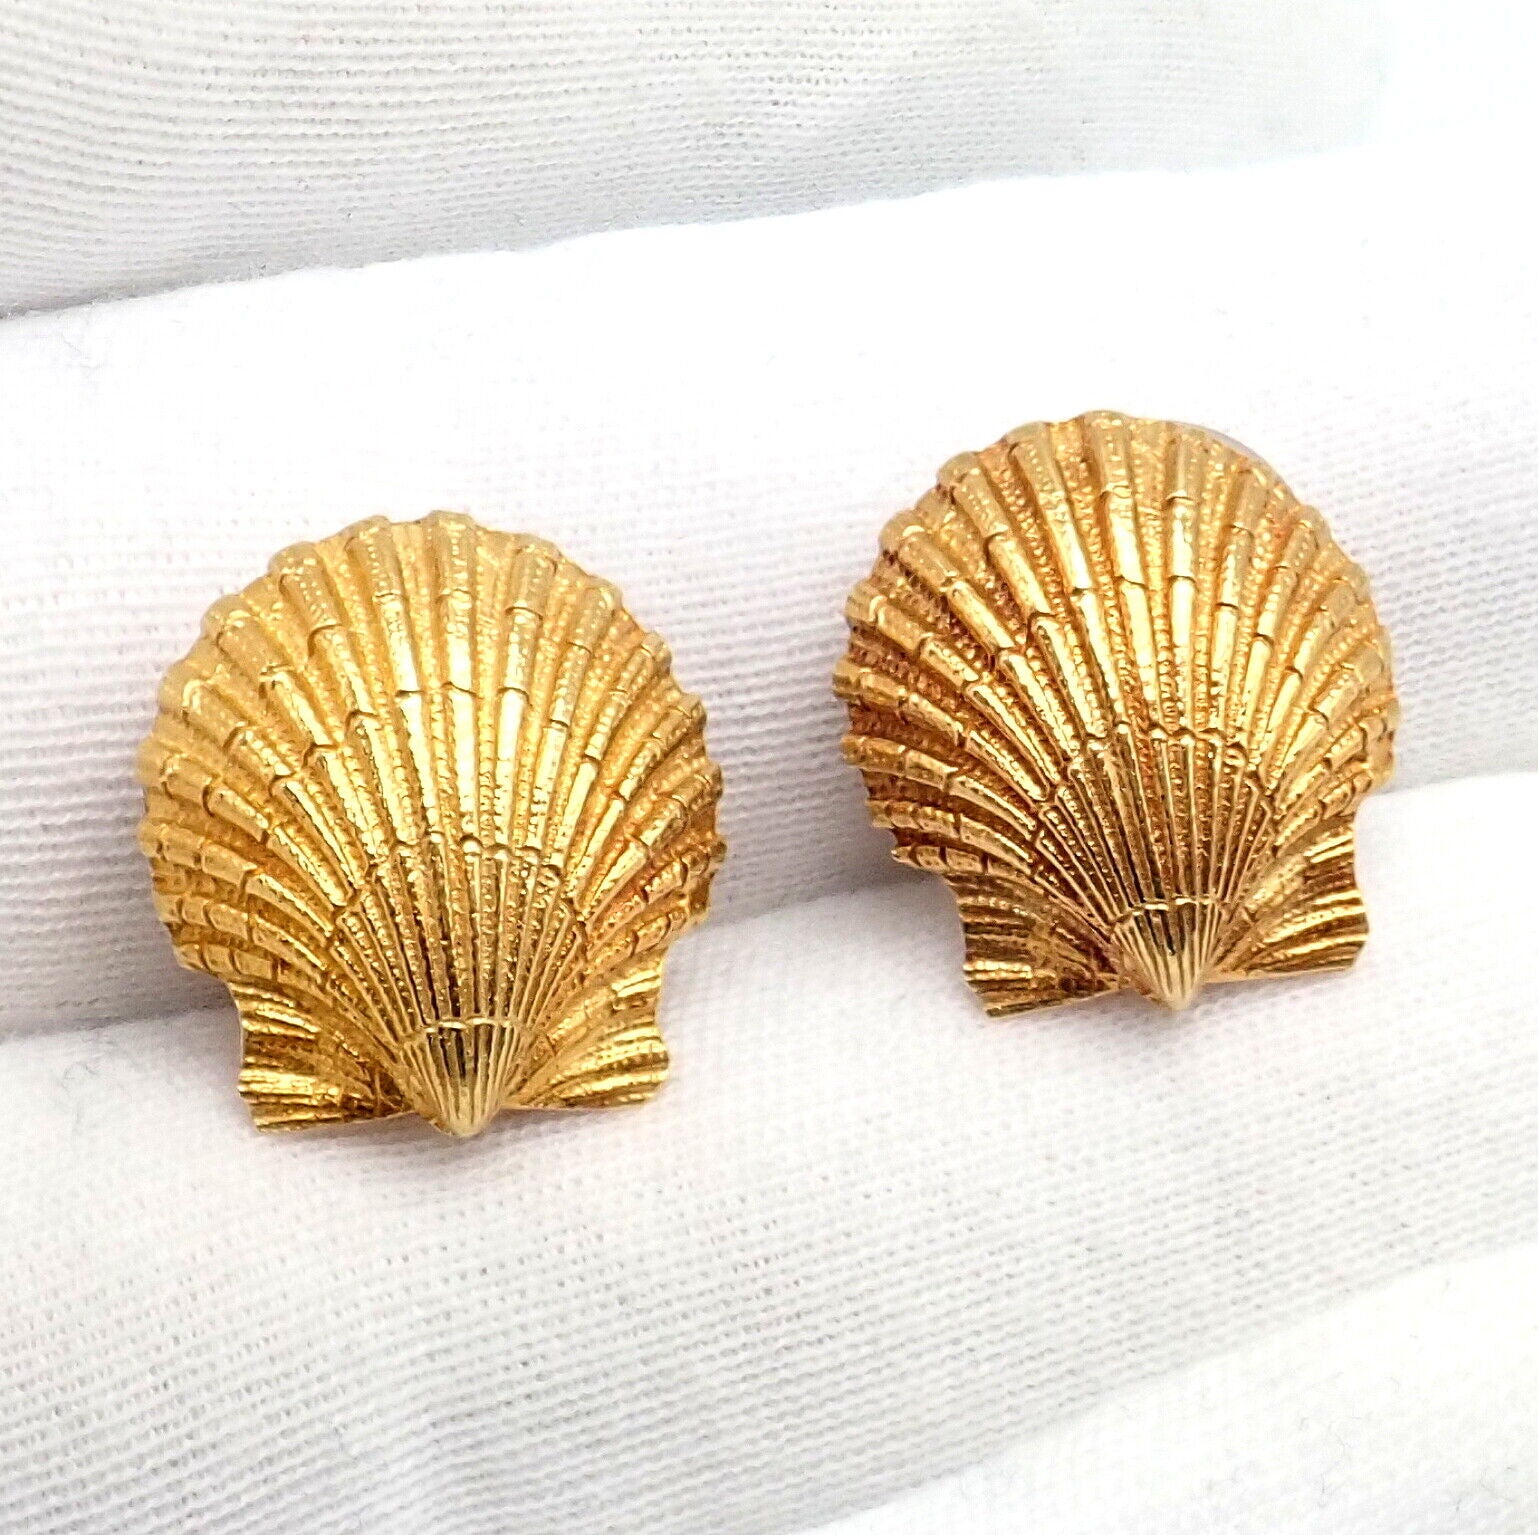 Tiffany & Co. Jewelry & Watches:Fine Jewelry:Earrings Authentic! Vintage Tiffany & Co Schlumberger 18k Yellow Gold Seashell Earrings